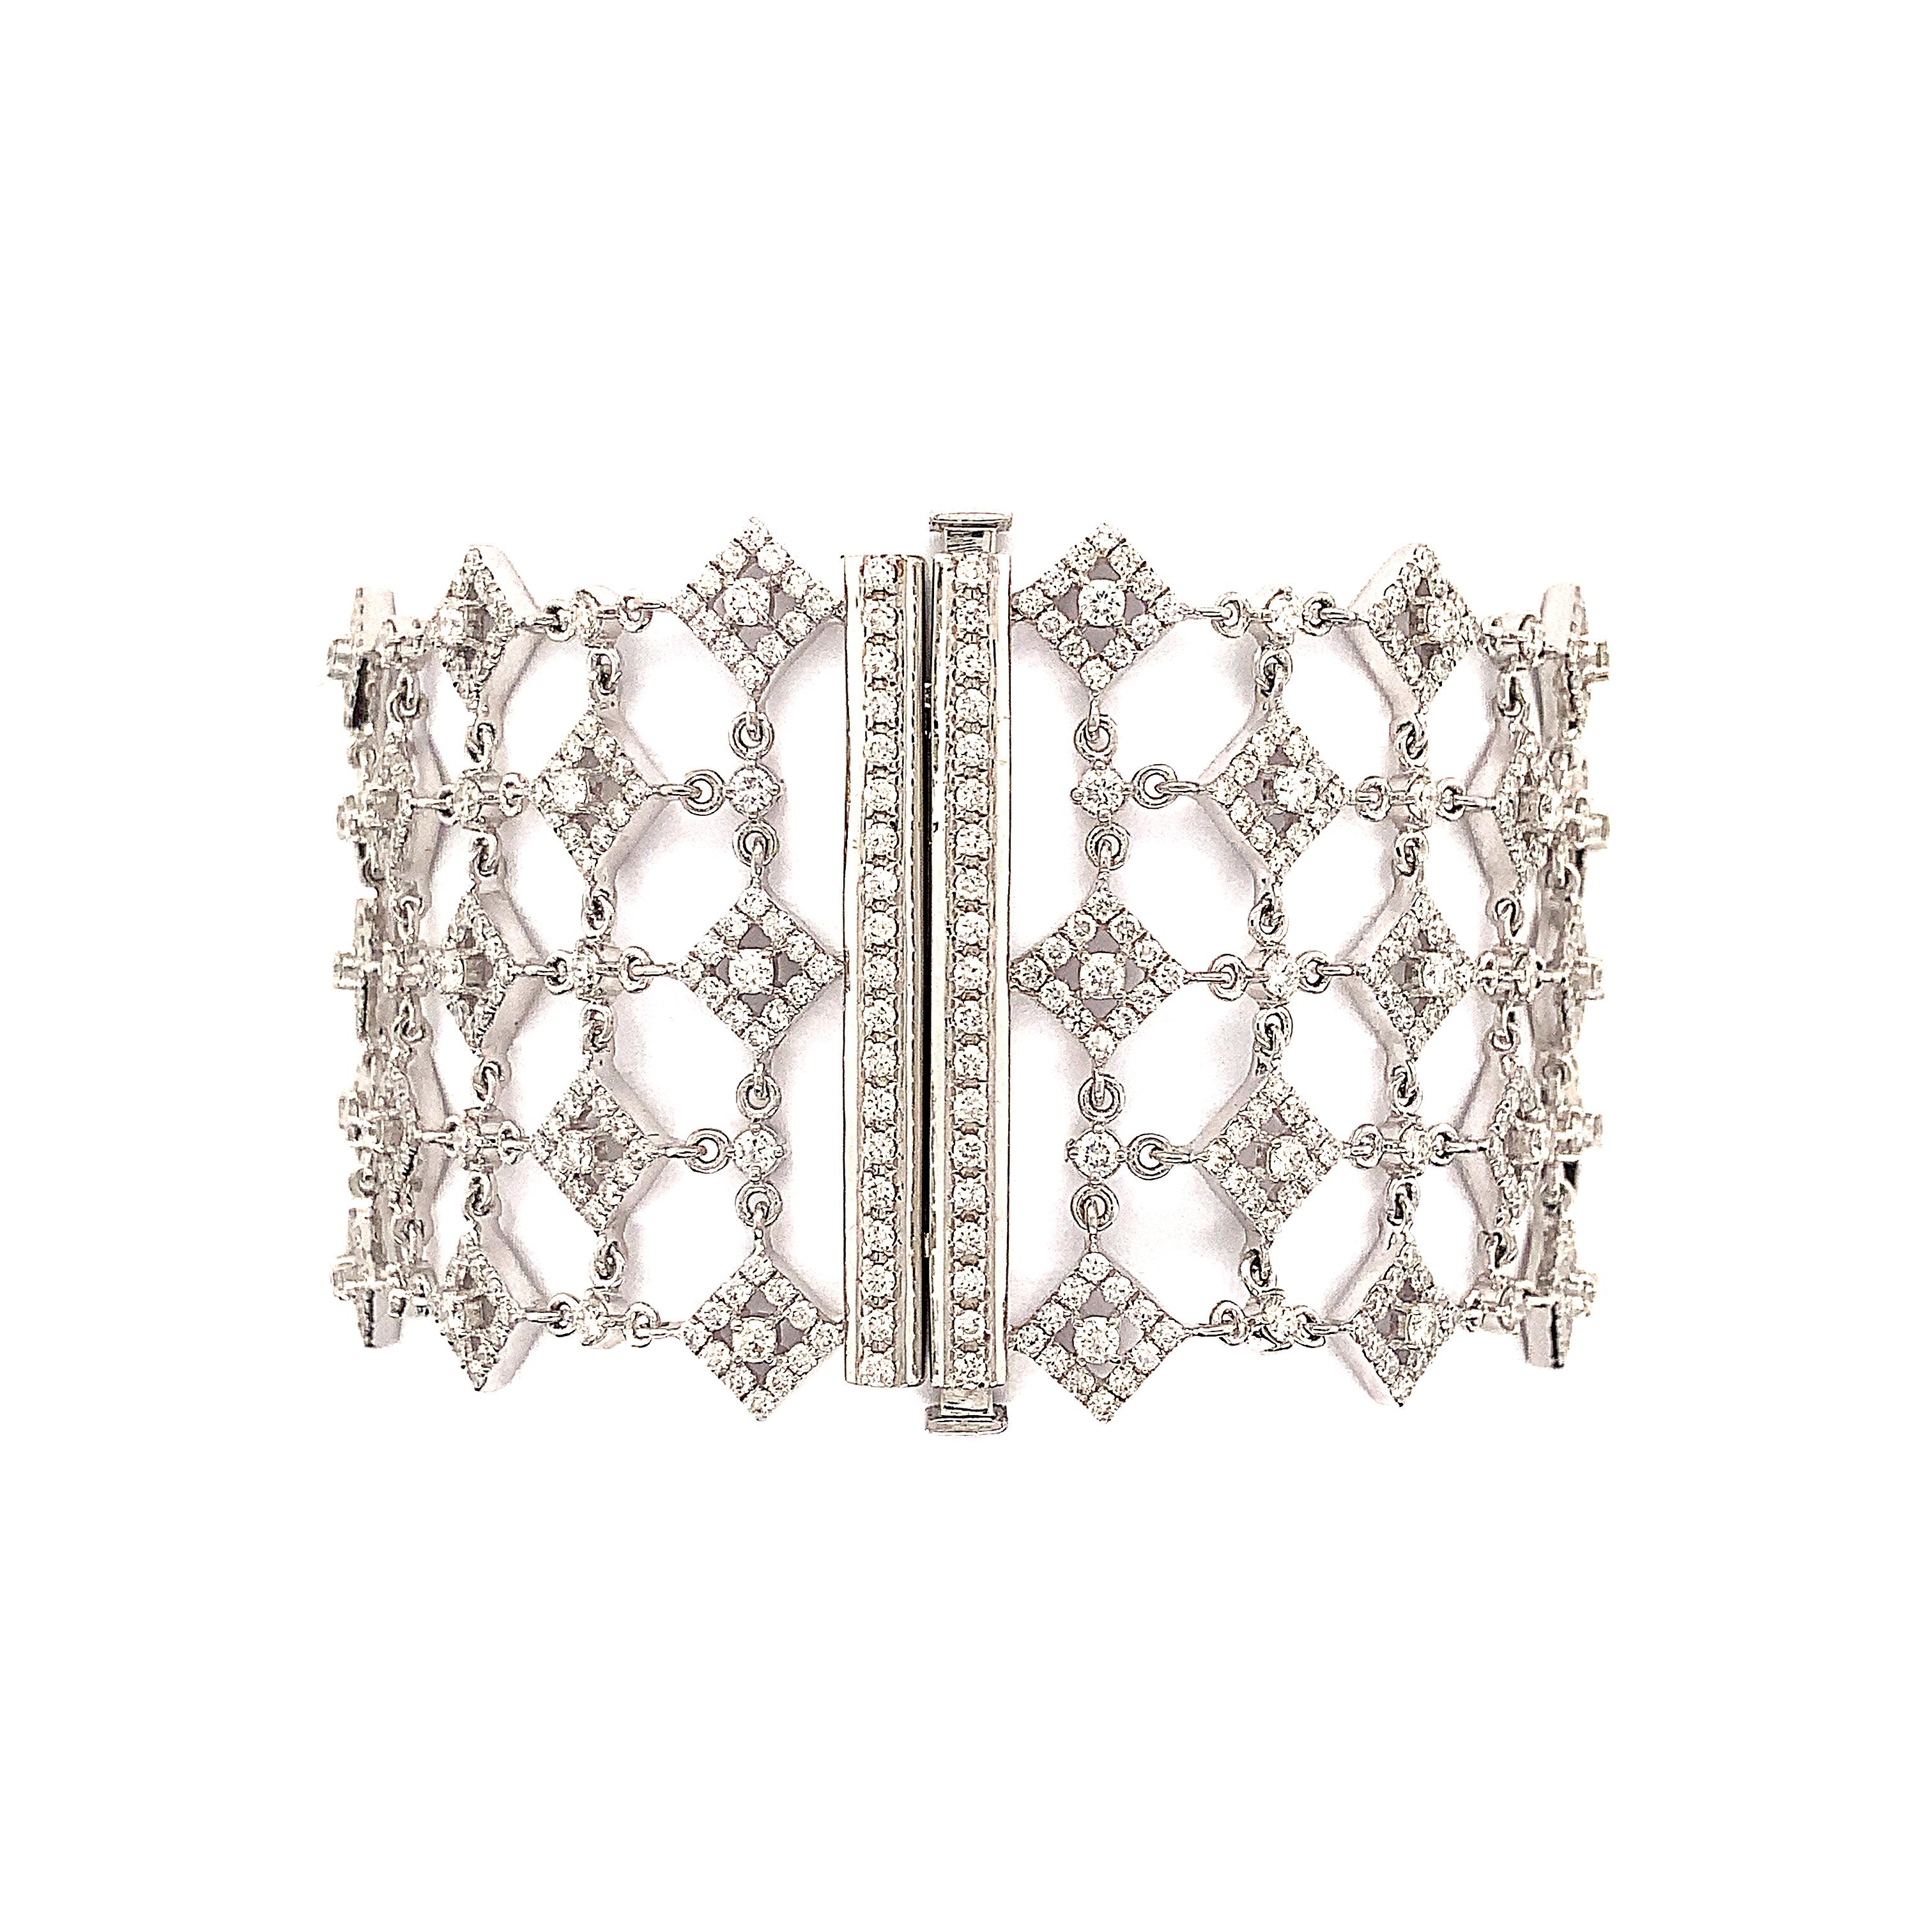  The Afarin Collection luxury bracelet is crafted to perfection and boasts 5 rows of dazzling 7 carat diamonds set in pristine 18K white gold. This glamorous piece features 849 round brilliant diamonds with a combined weight of 7.15 carats, boasting